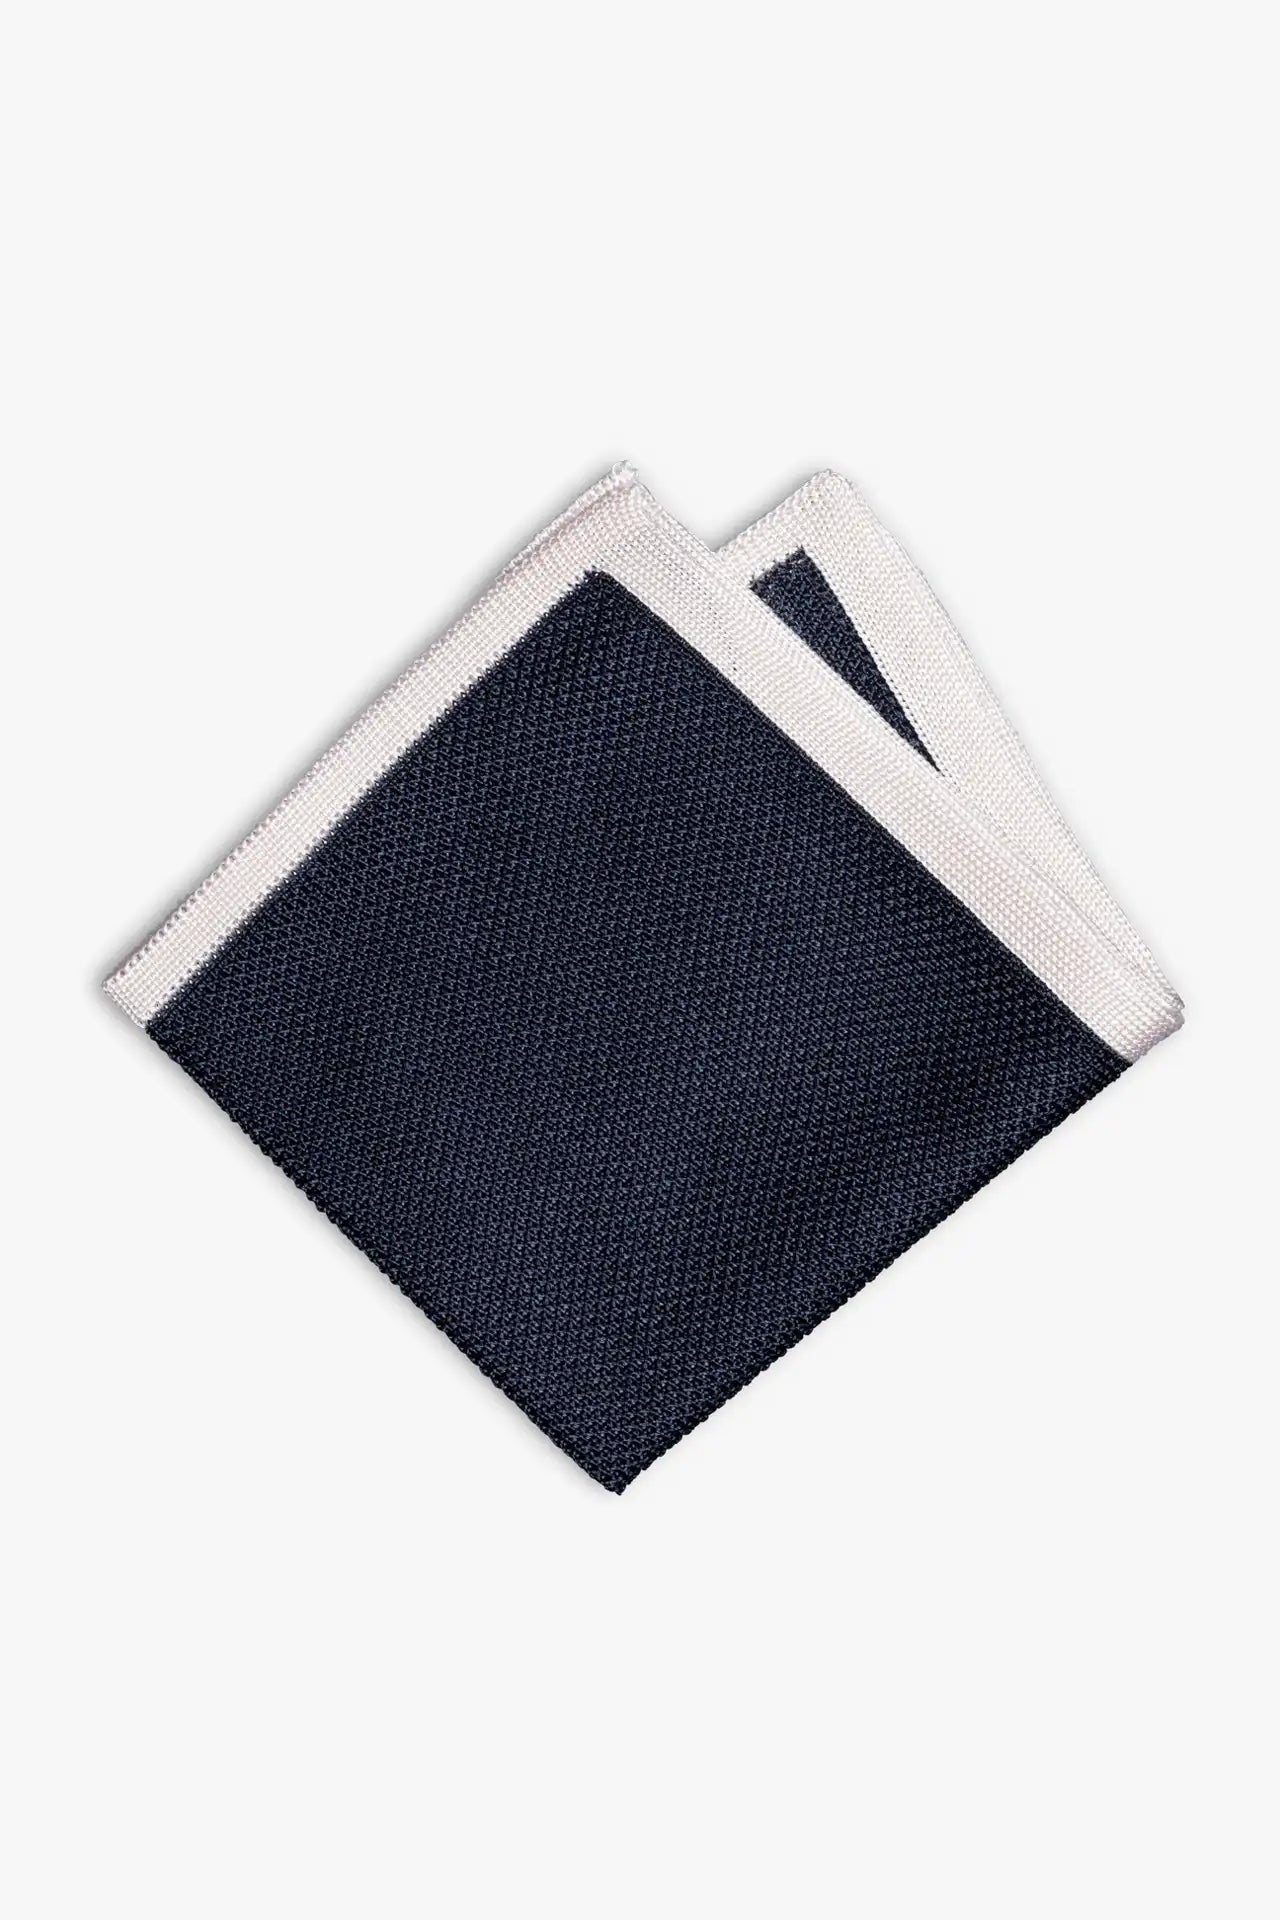 Navy blue knitted pocket square with white boarder. Made of silk in Italy.